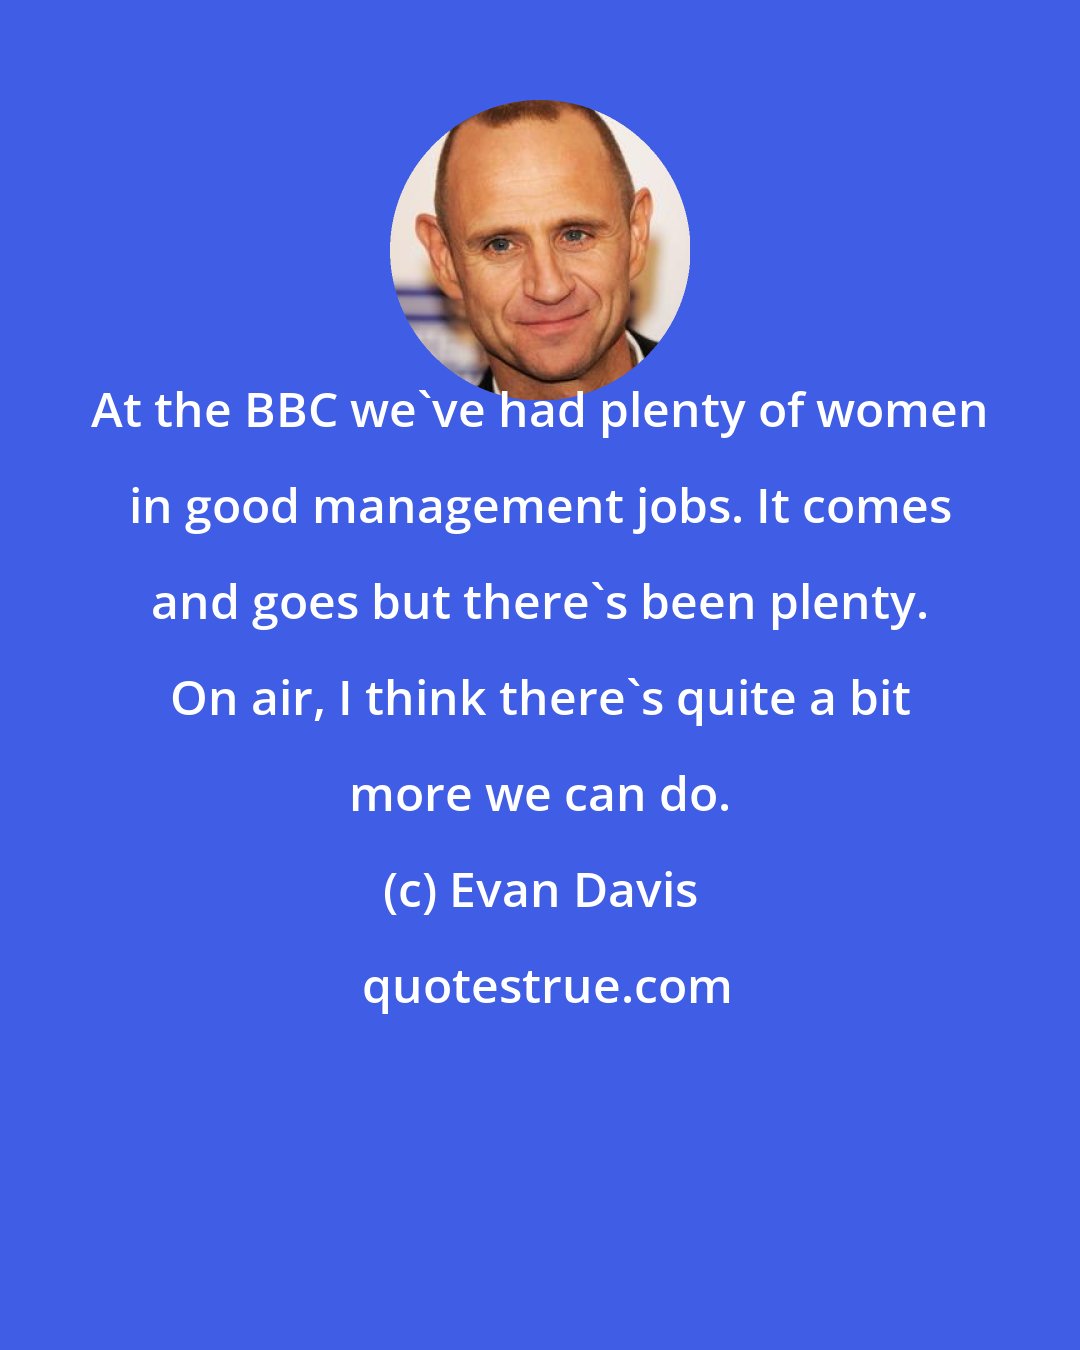 Evan Davis: At the BBC we've had plenty of women in good management jobs. It comes and goes but there's been plenty. On air, I think there's quite a bit more we can do.